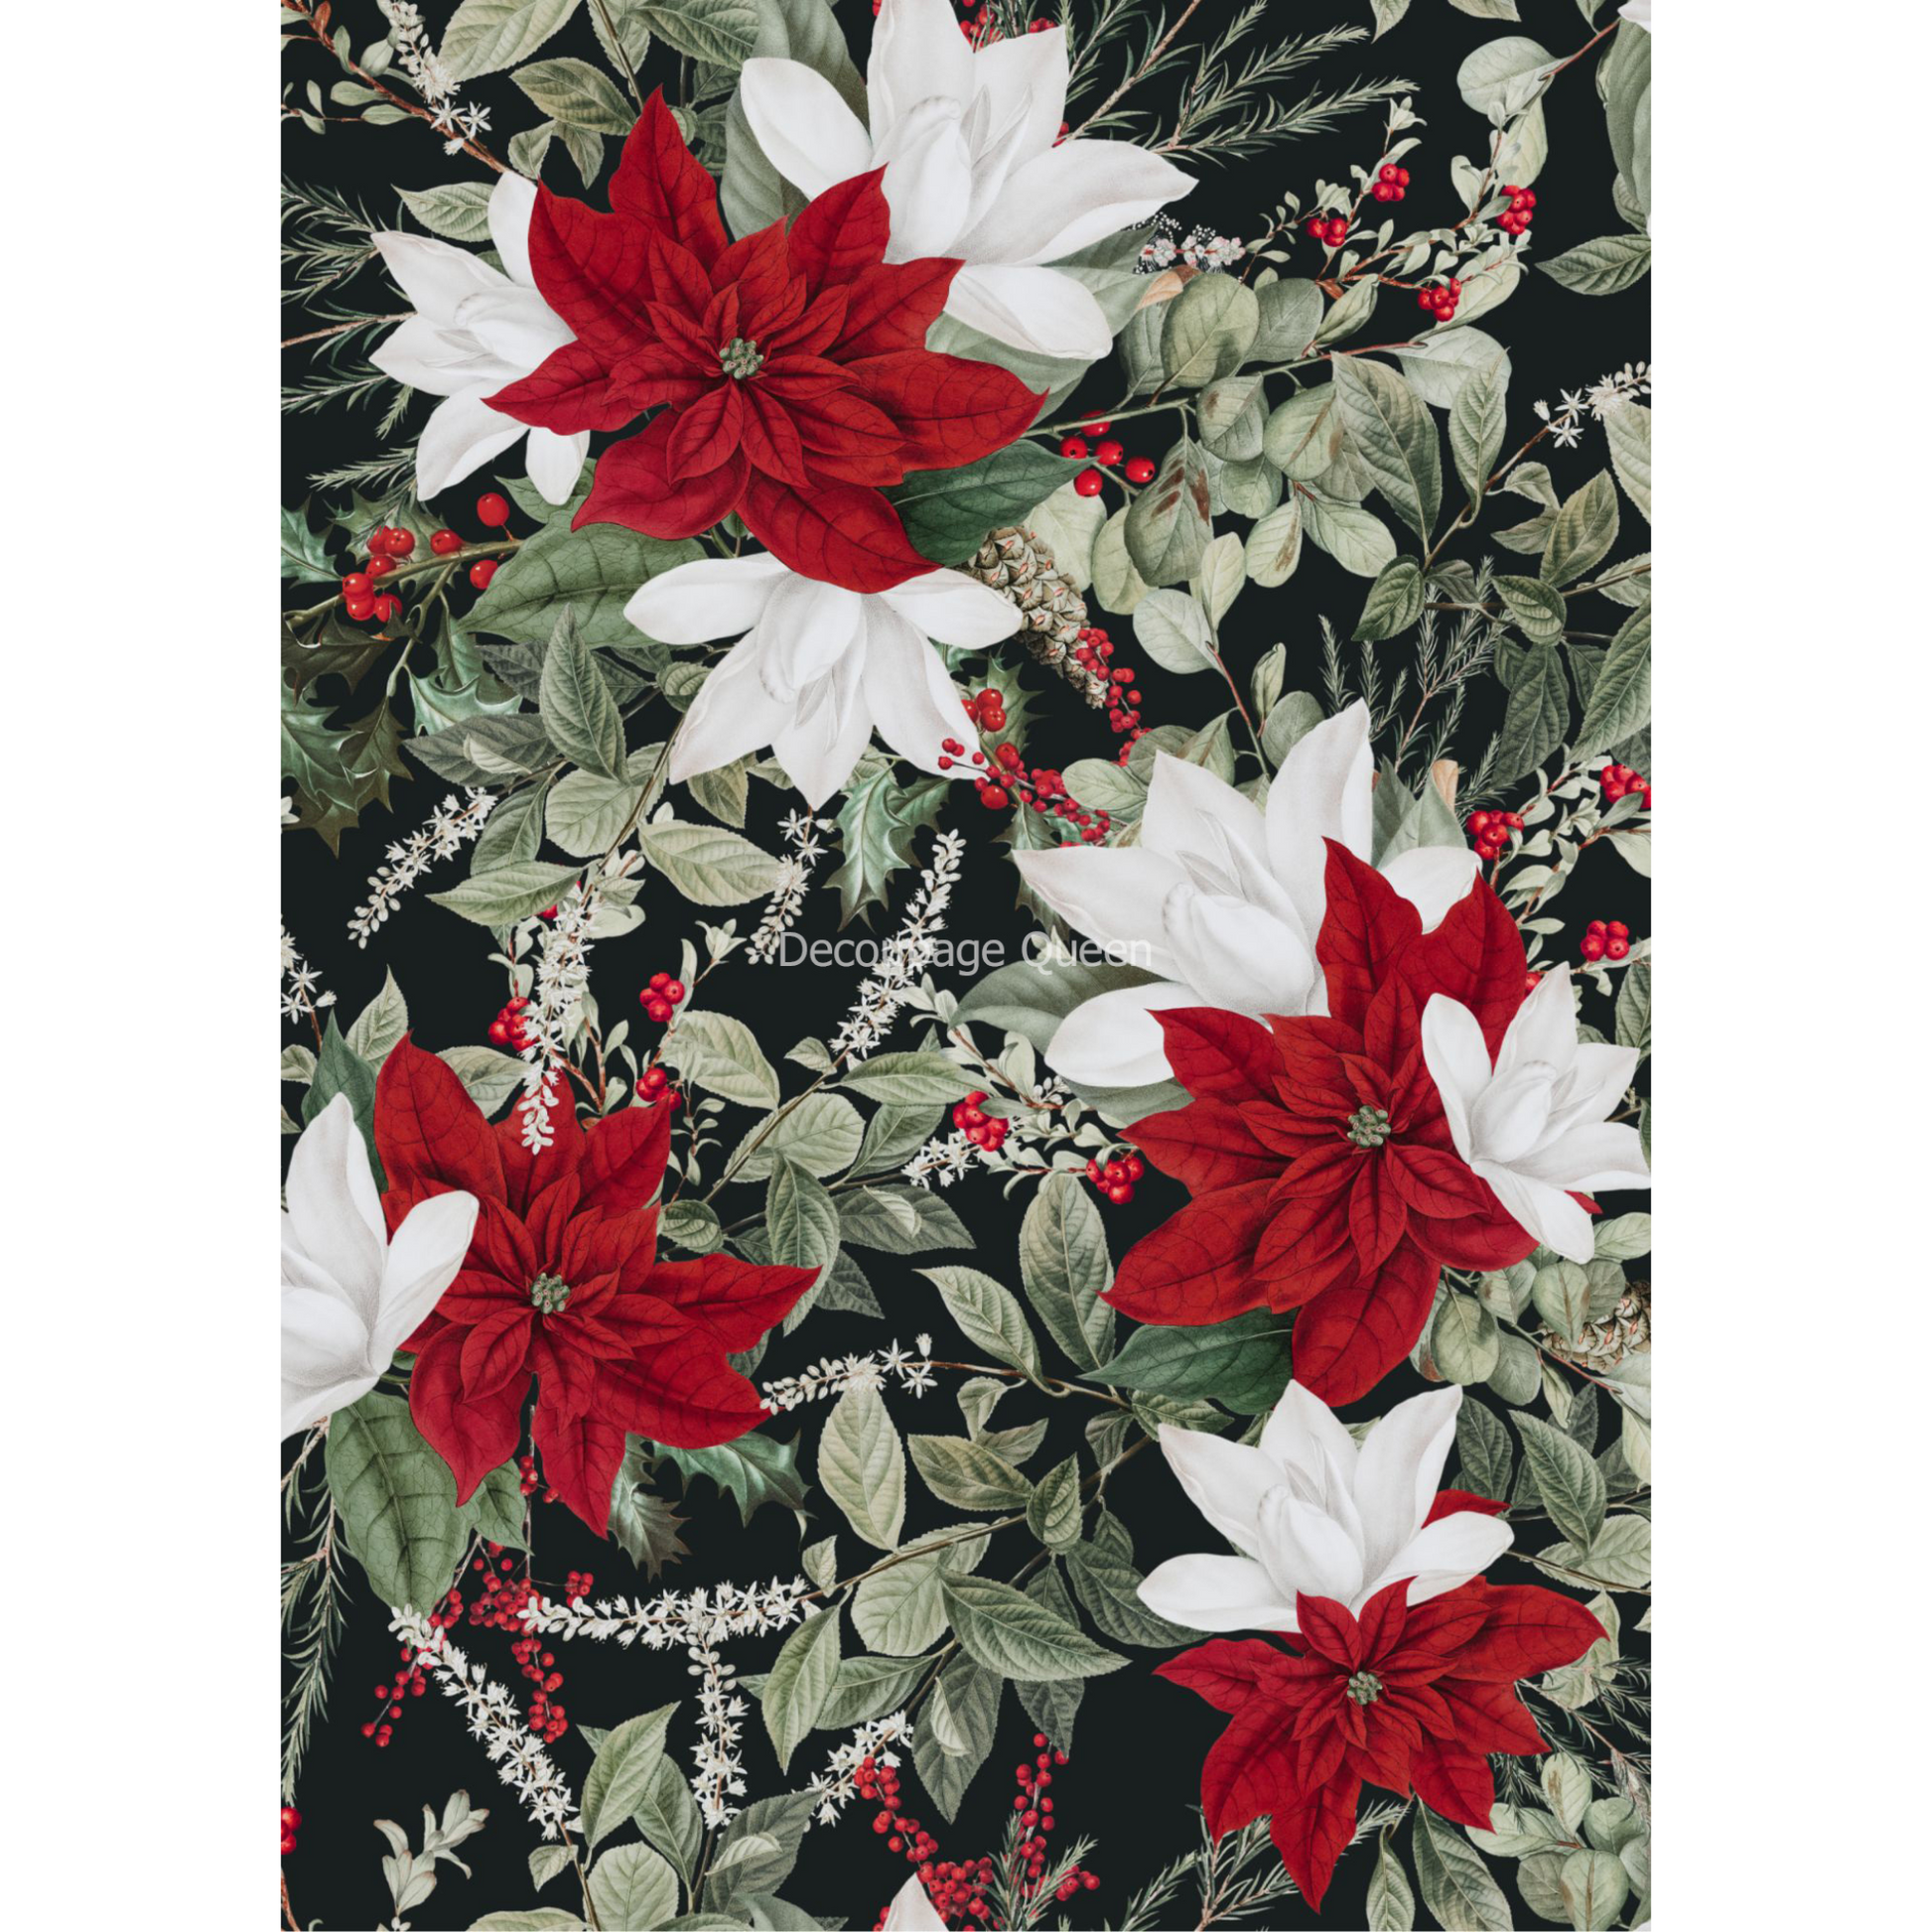 Chistmas Poinsettas-Black-decoupage rice paper by Decoupage Queen available at Milton's Daughter.